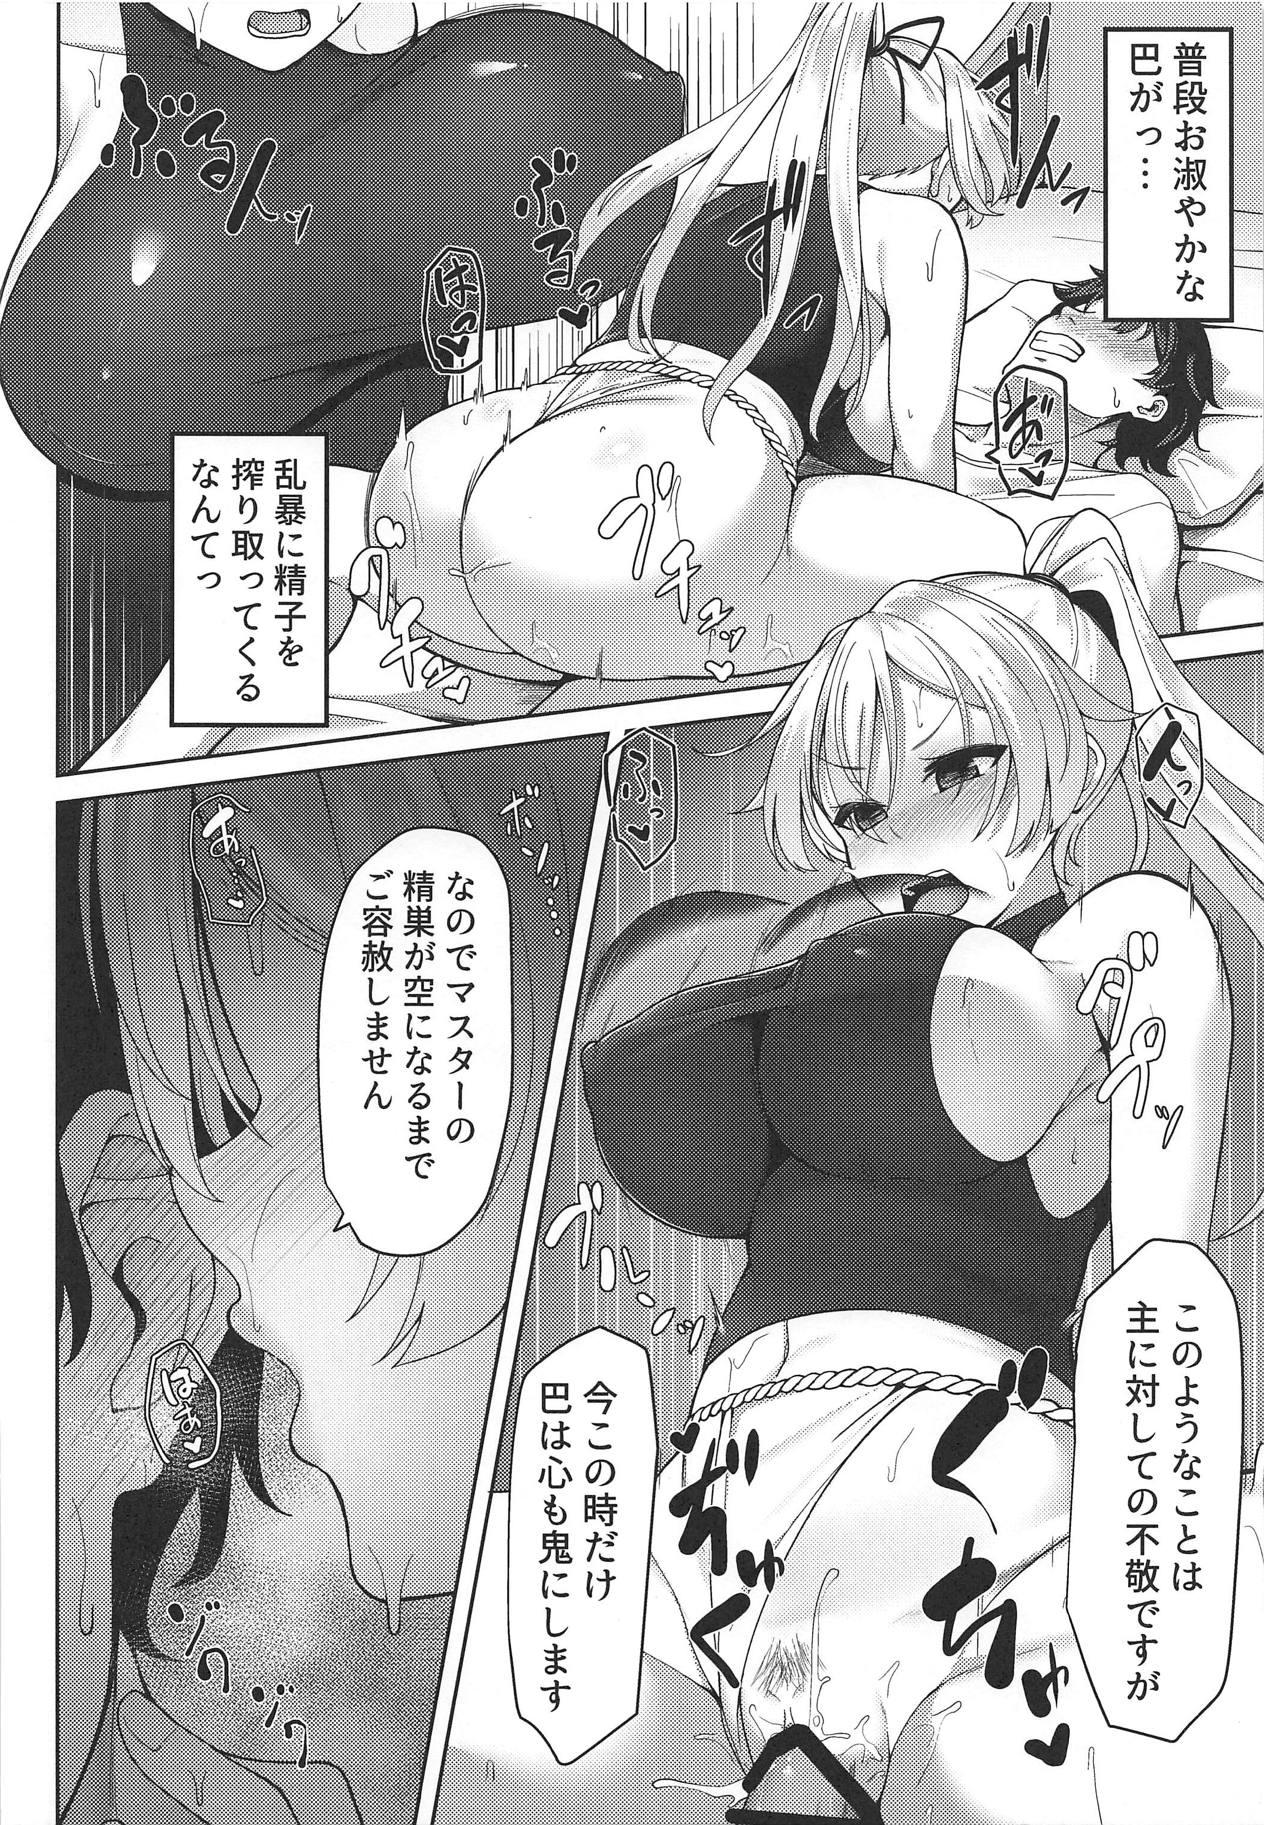 Whooty ☆☆☆☆☆☆☆☆Sand - Fate grand order Tiny - Page 9